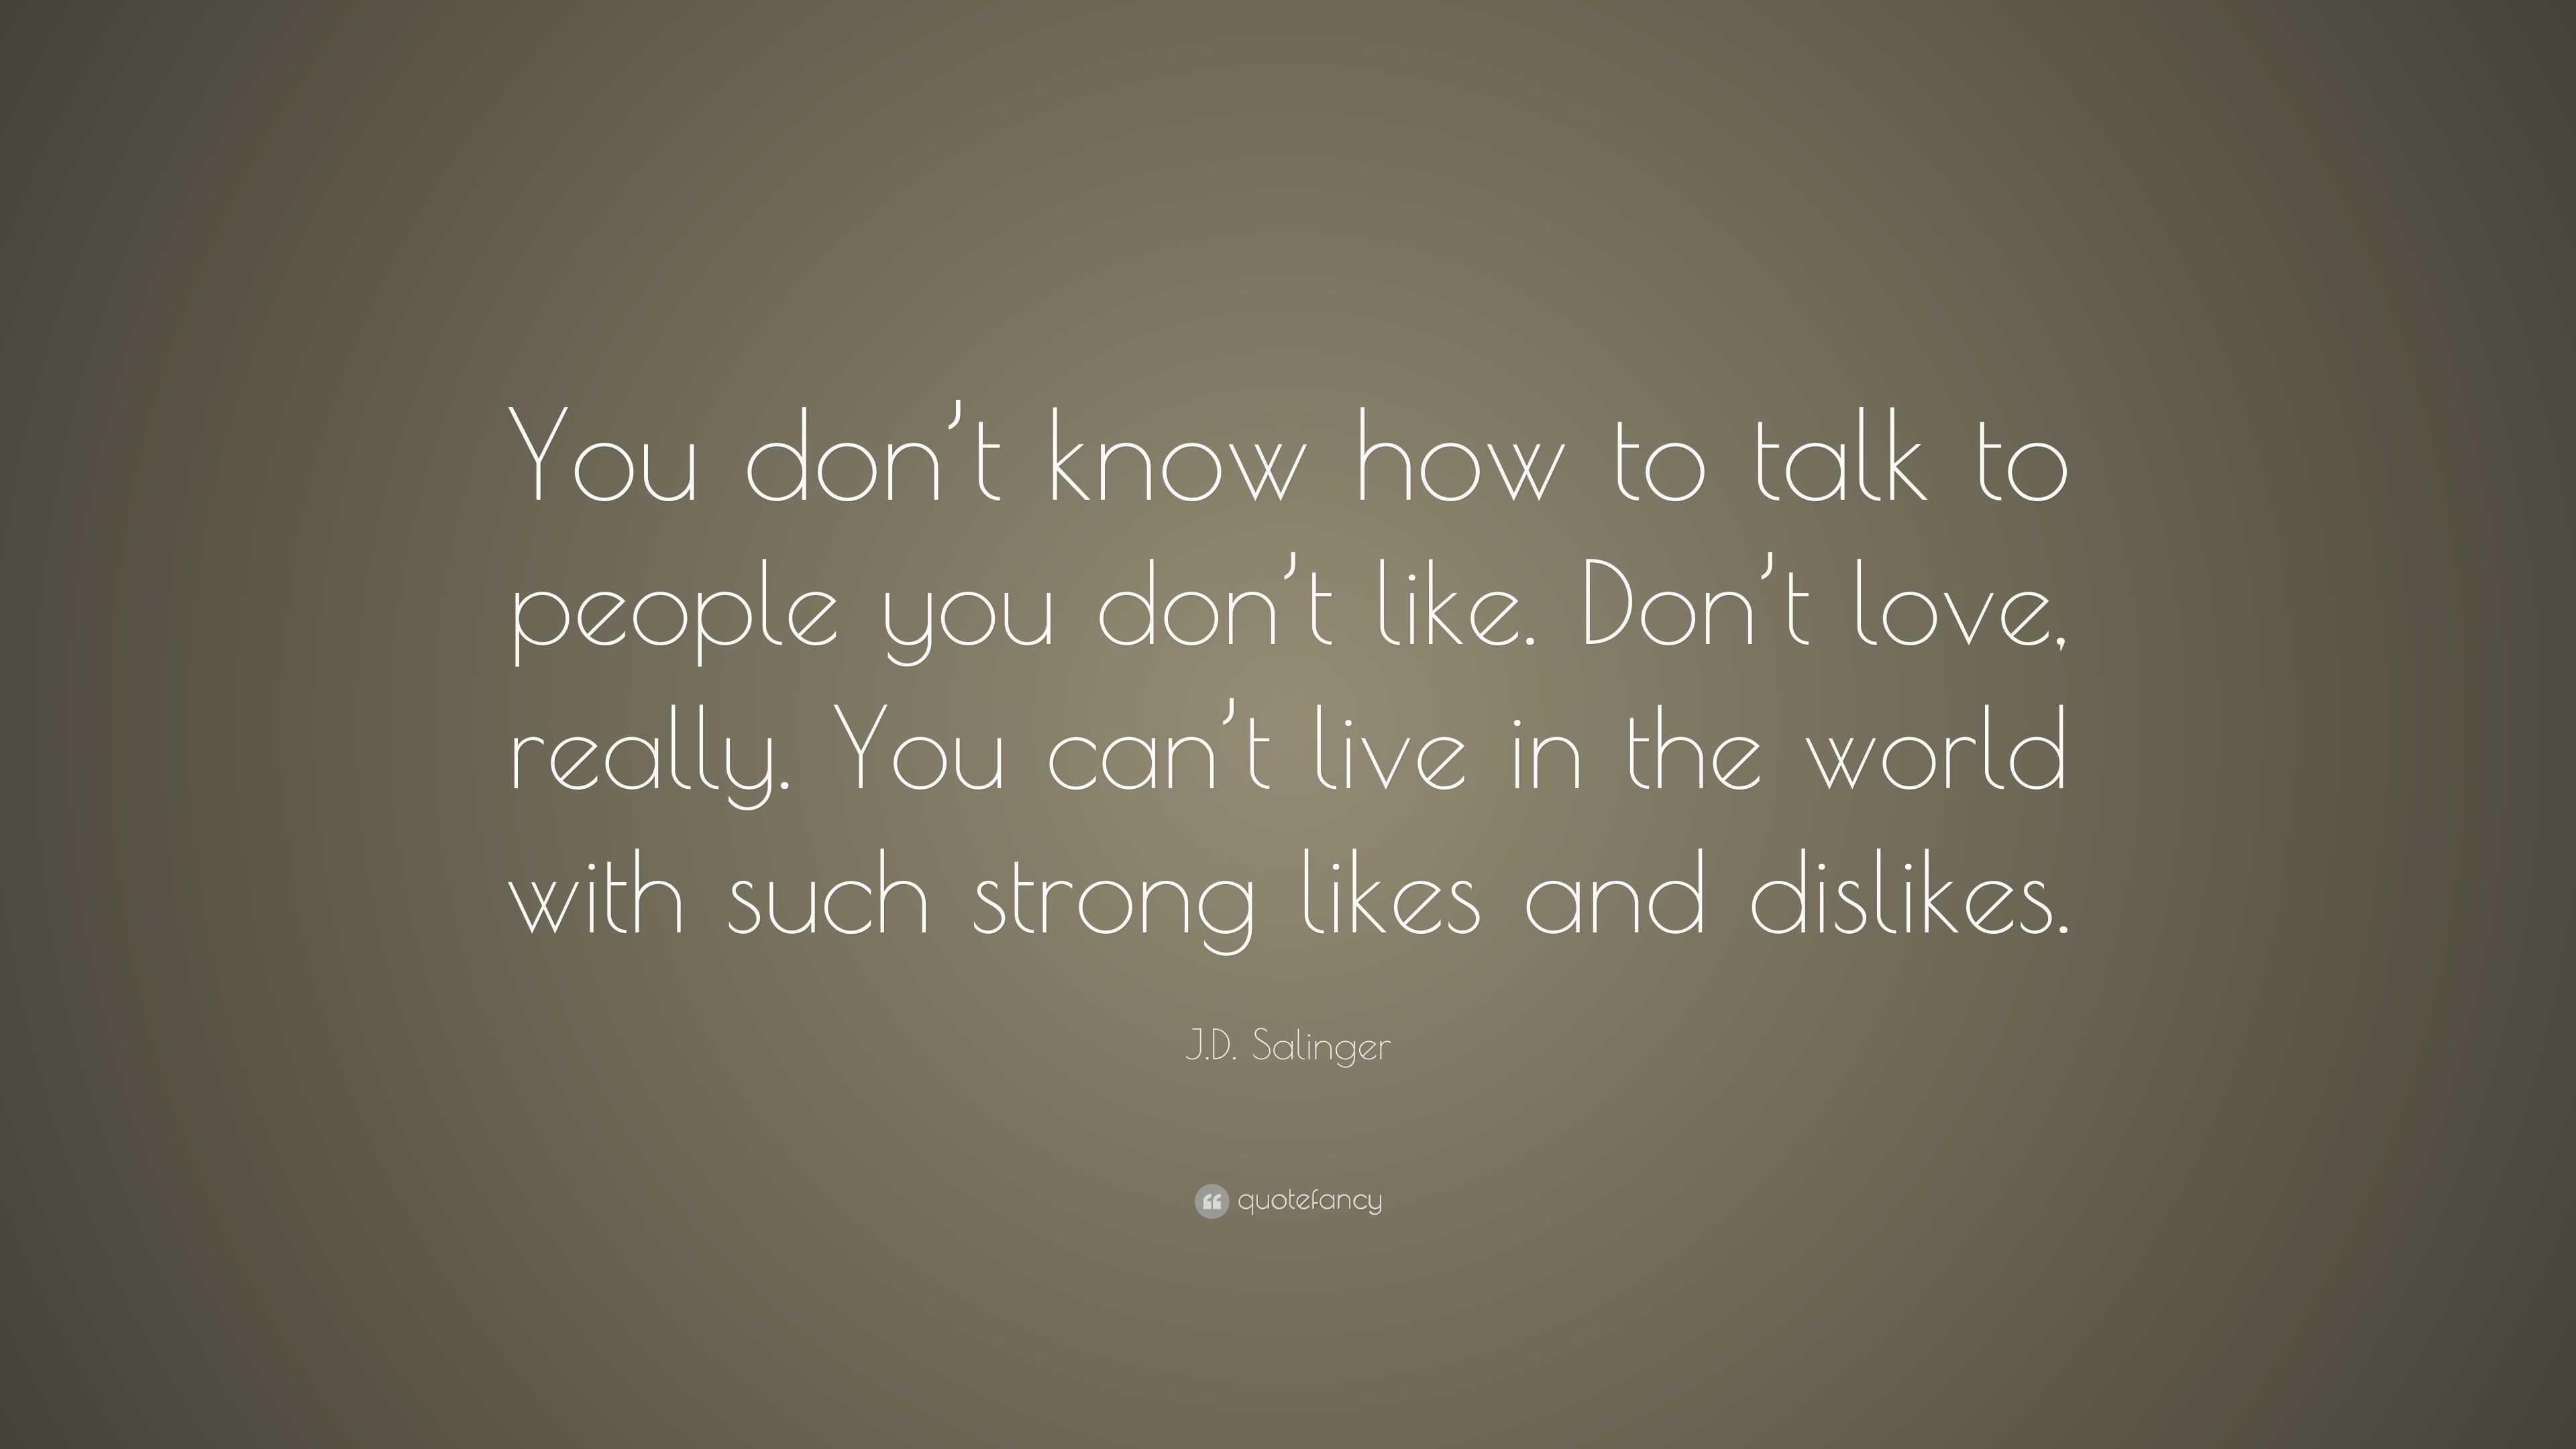 J.D. Salinger Quote: “You don’t know how to talk to people you don’t ...